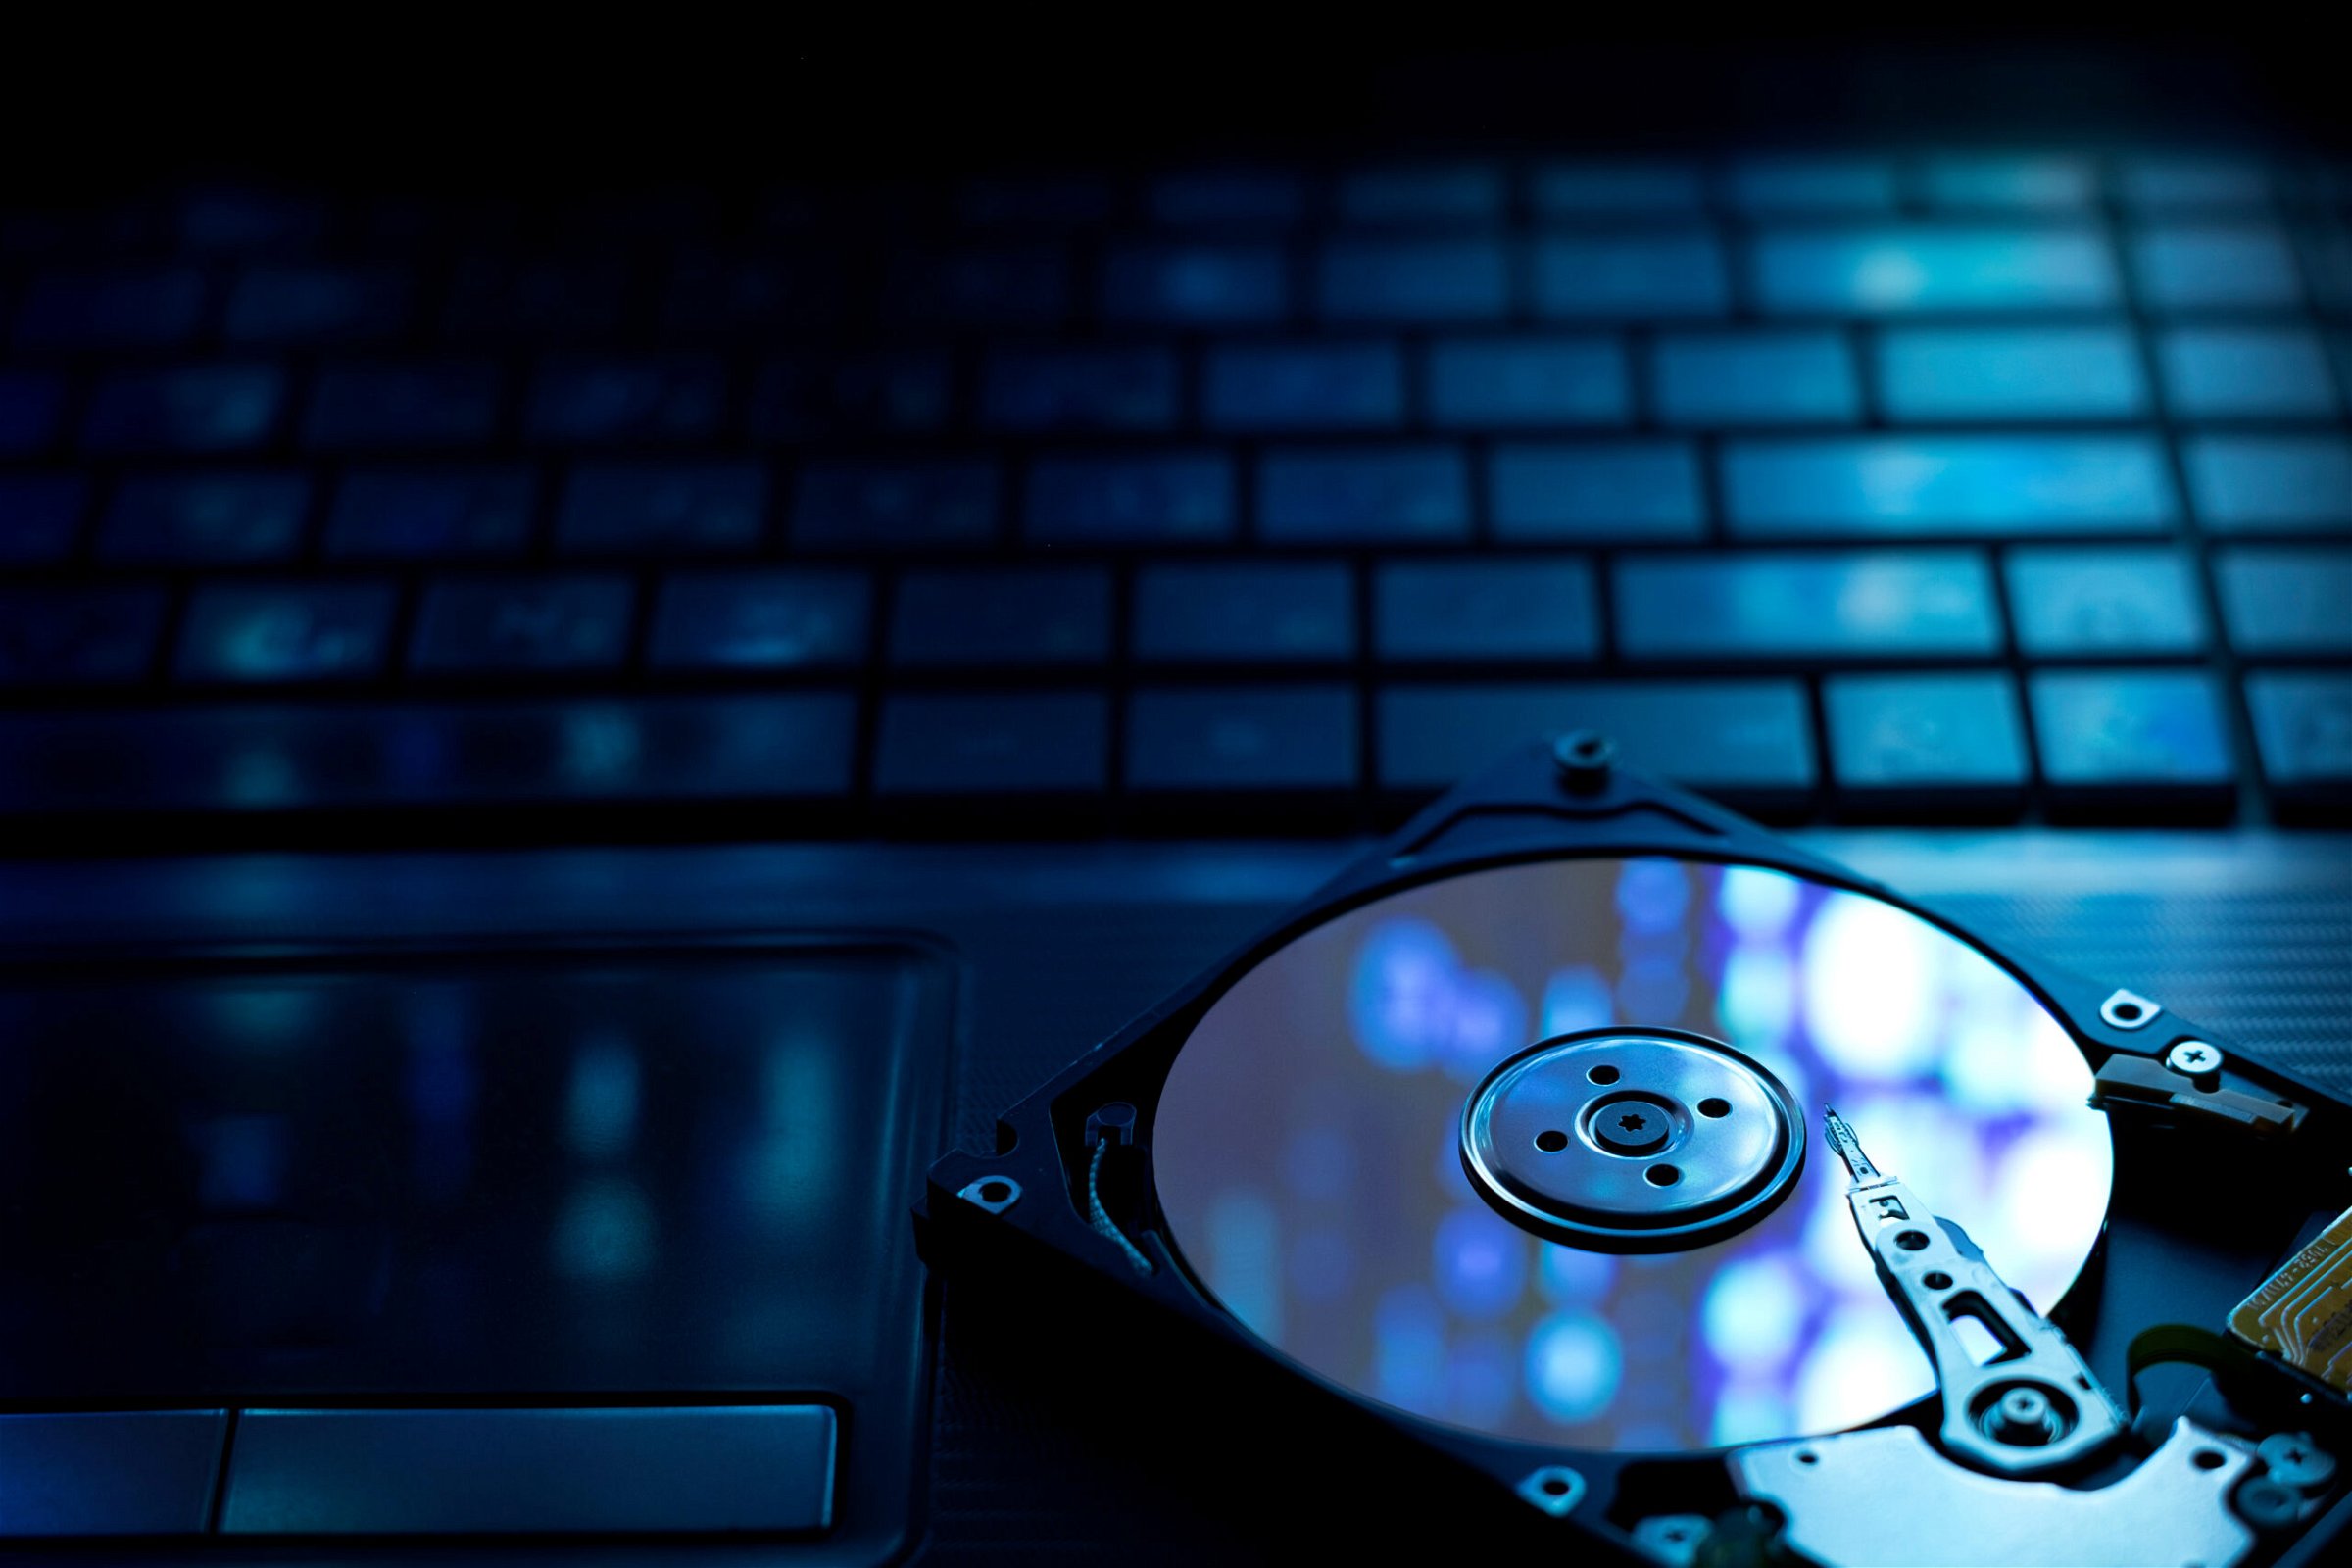 Never Lose Data Again with These Effective Backup Strategies